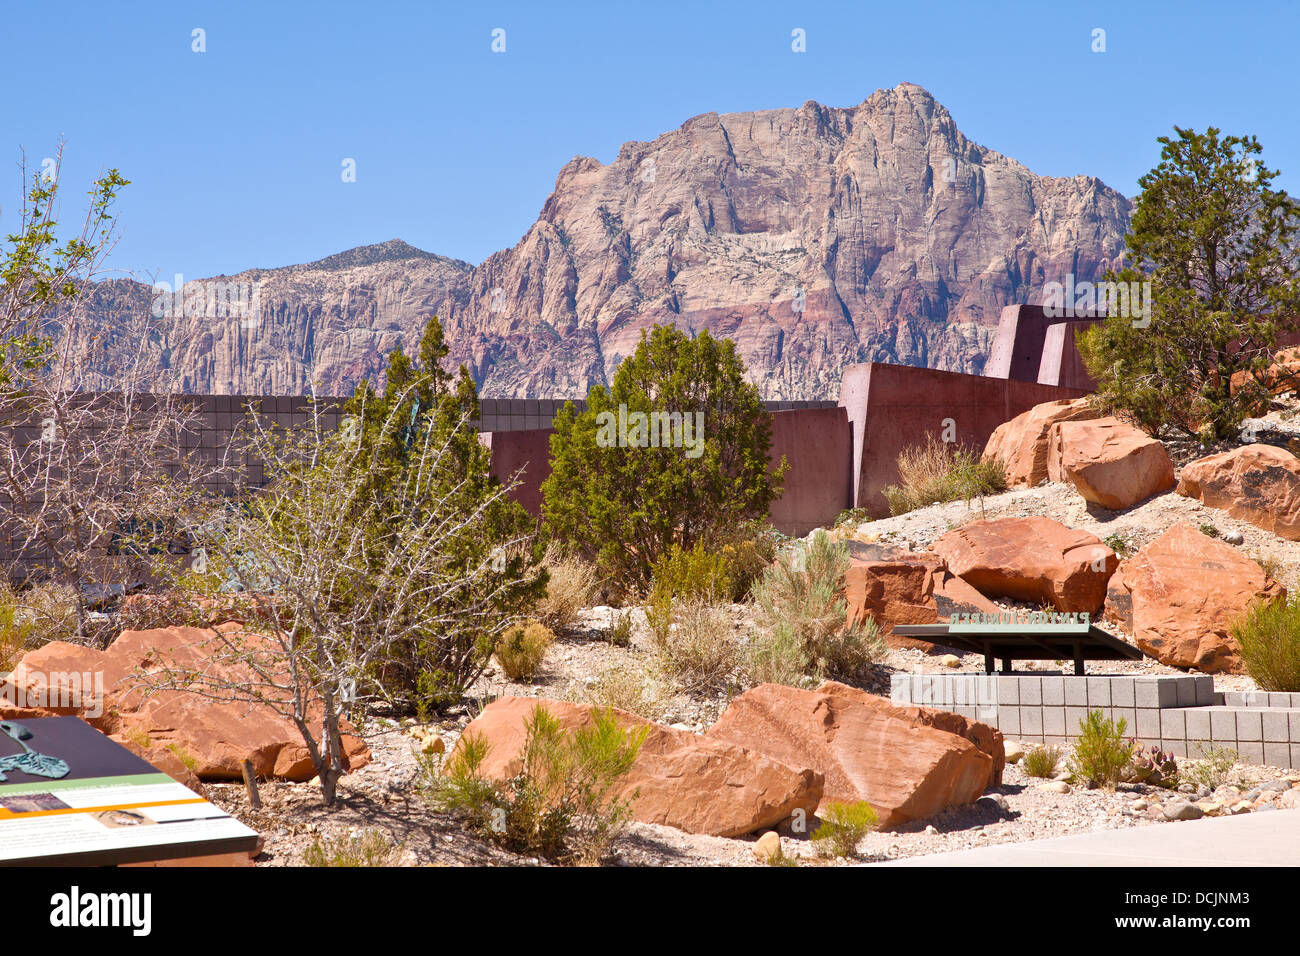 Il Red Rock Canyon visitor center Nevada. Foto Stock